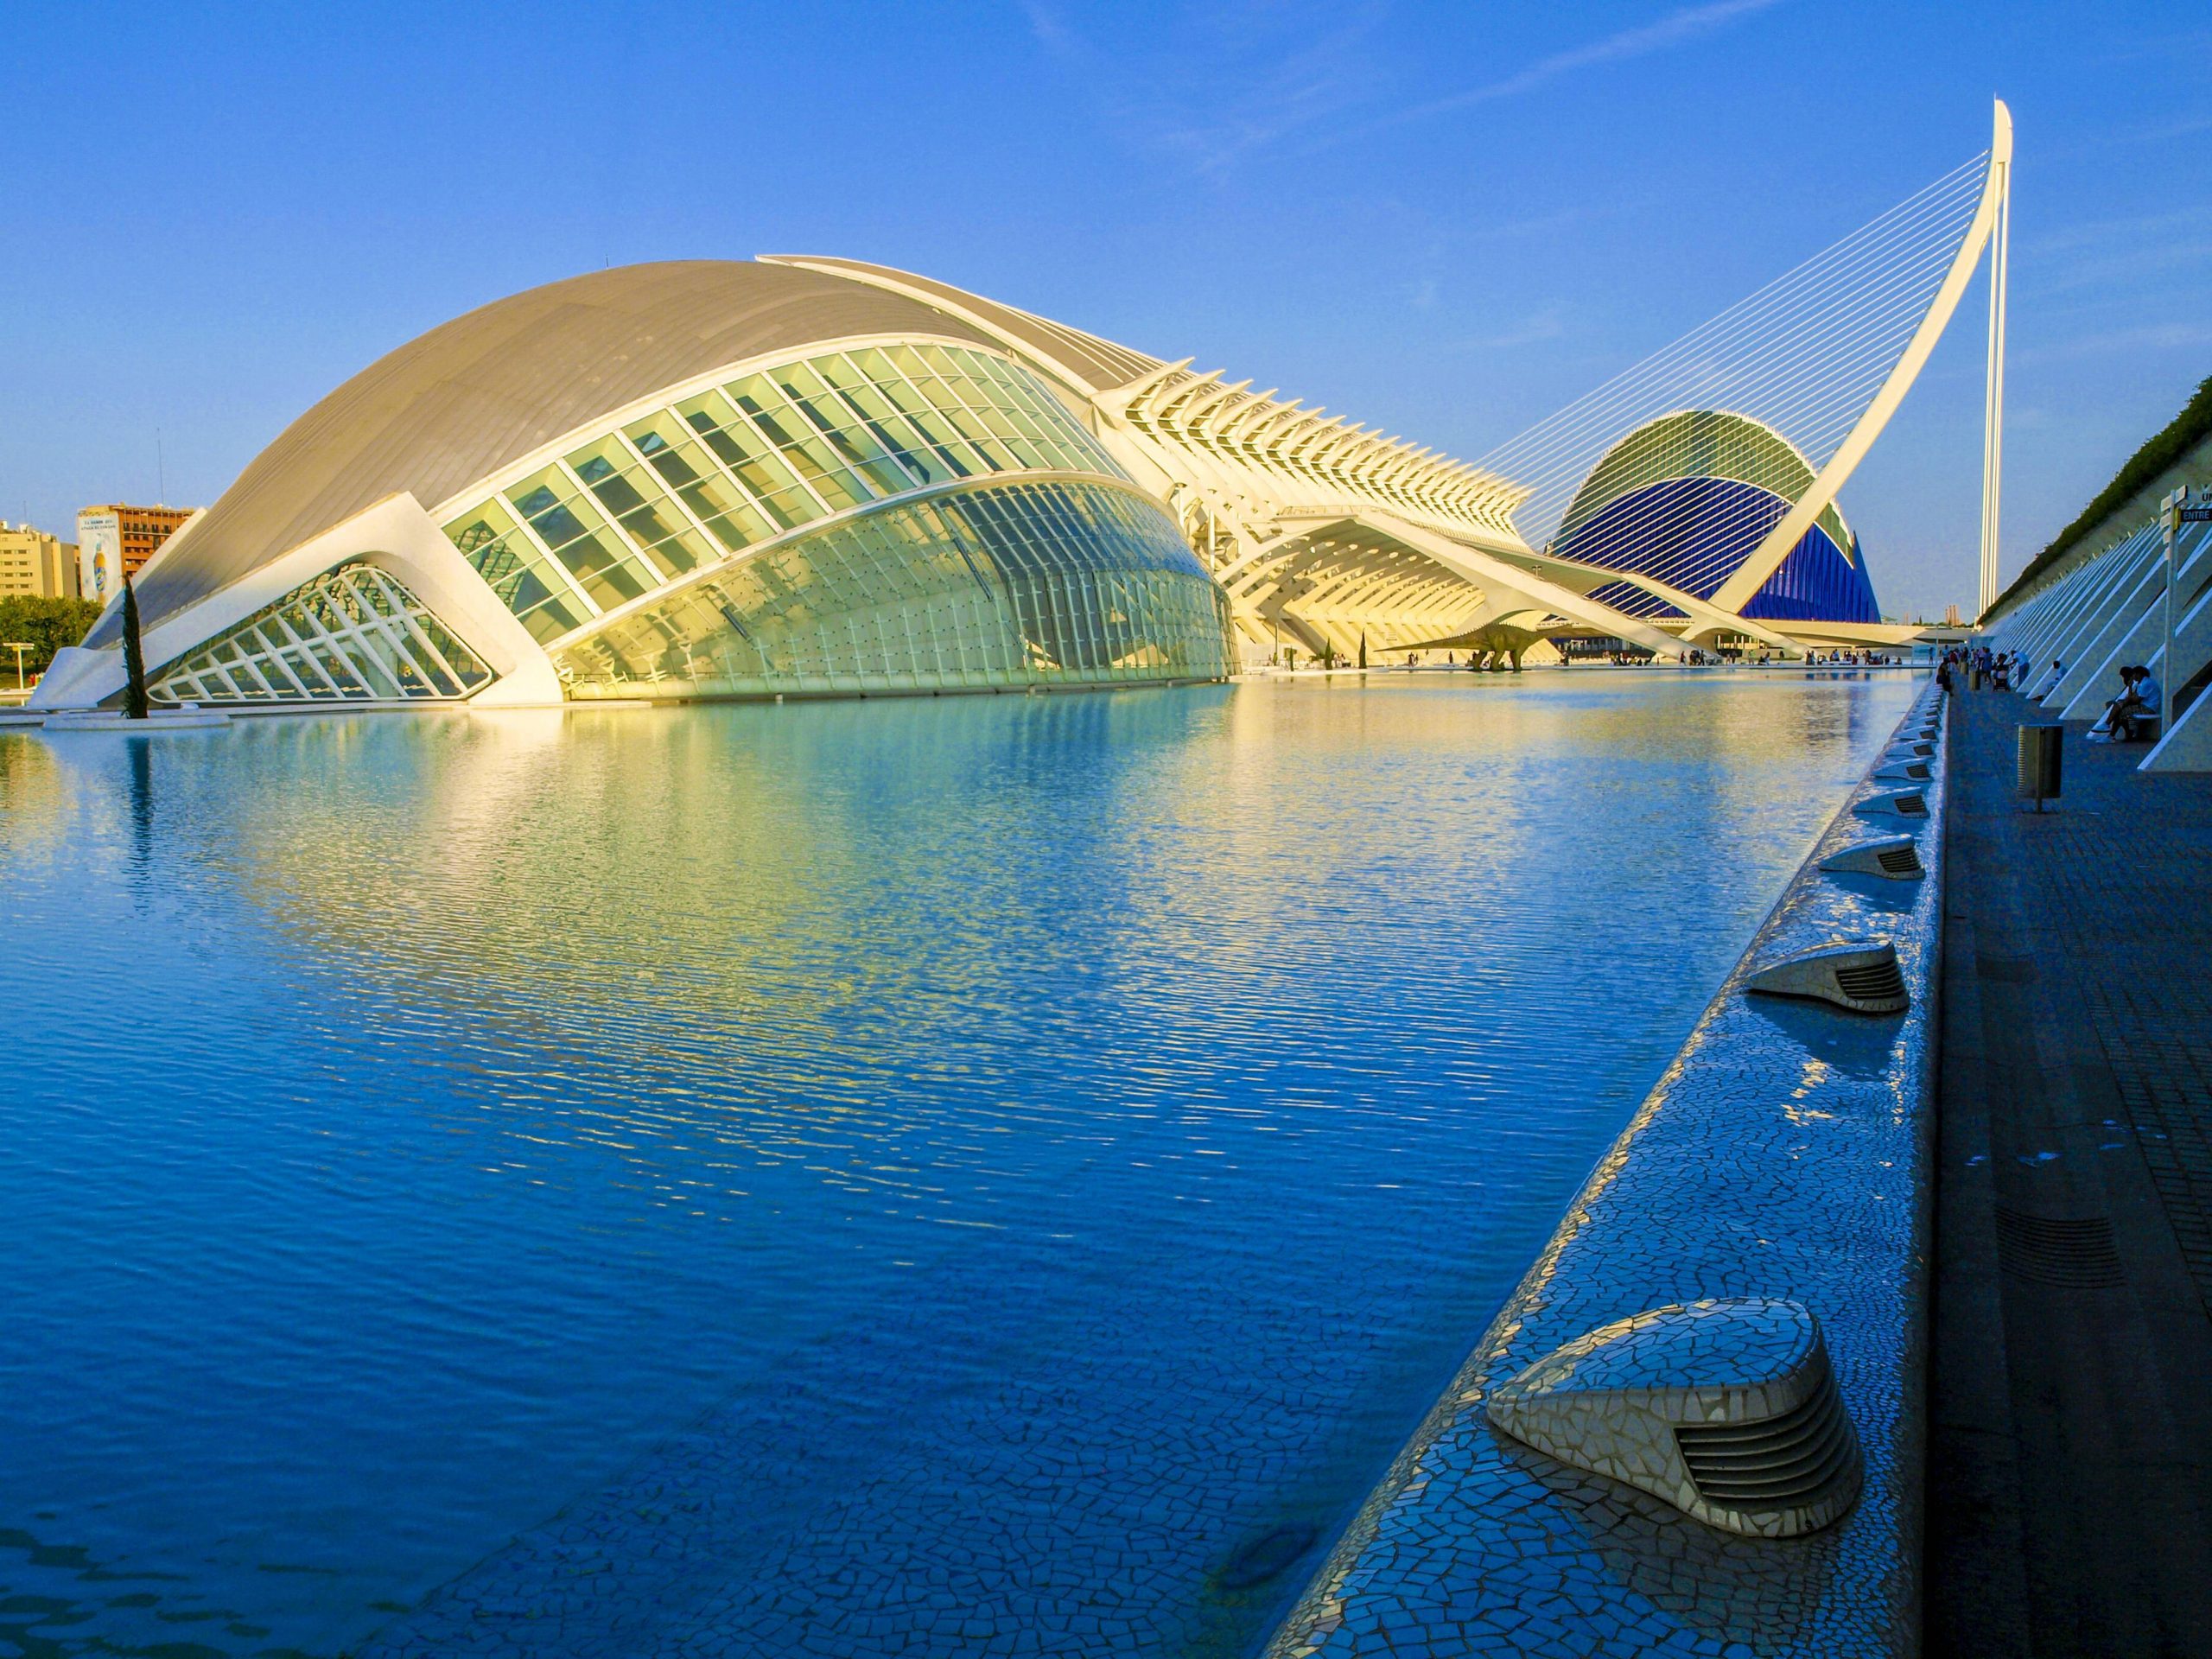 Spain’s Valencia bids to become 2022 European Capital of Innovation